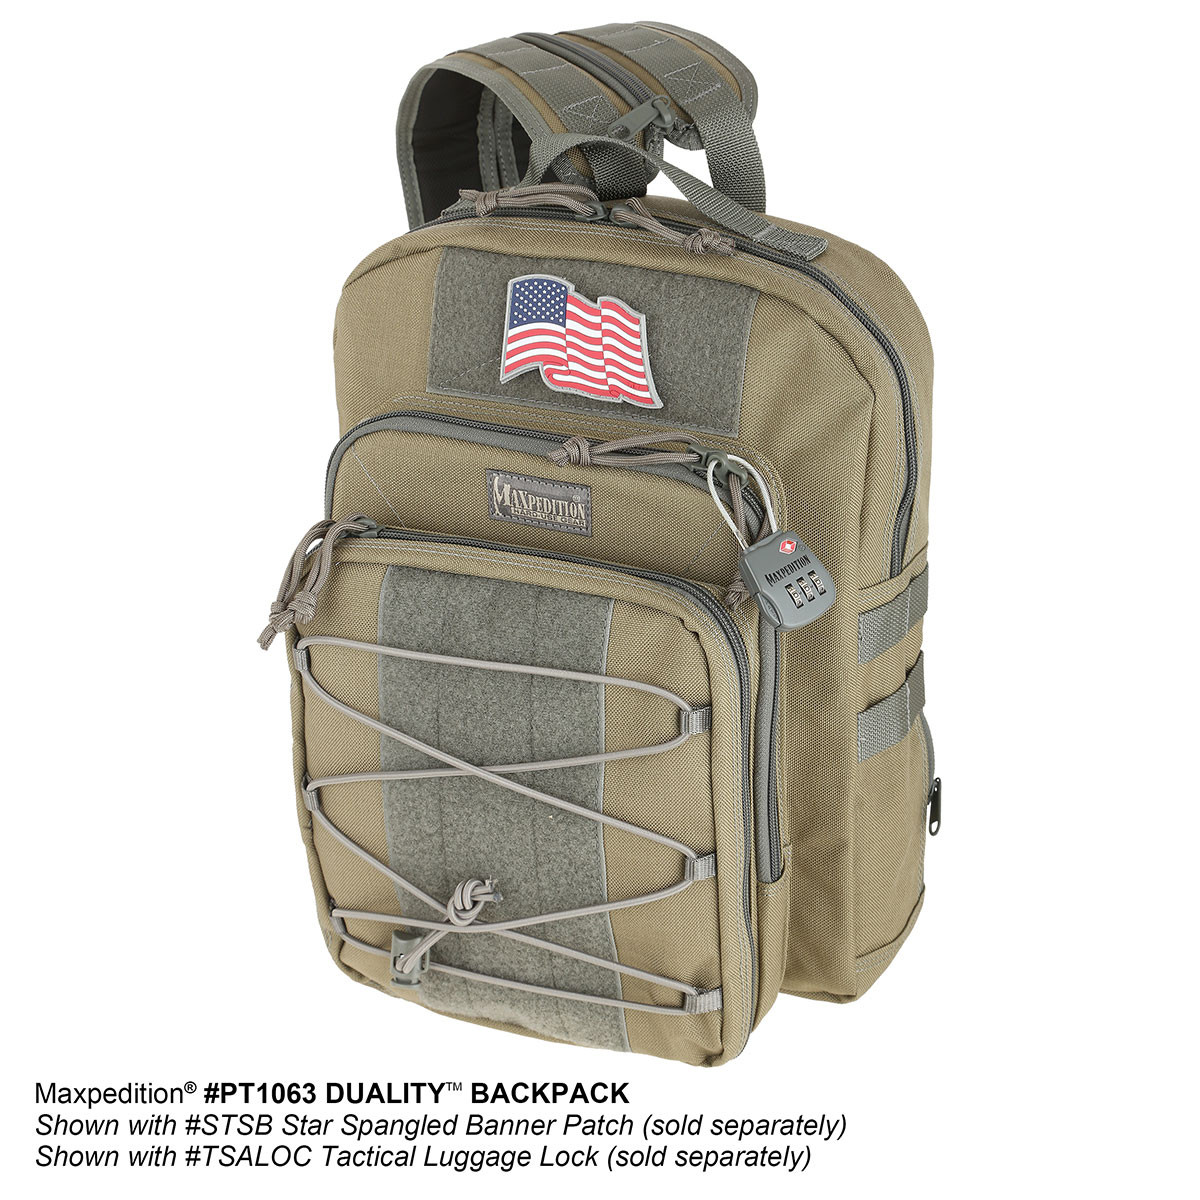 Maxpedition Duality Backpack Black - Tactical Asia - Philippines